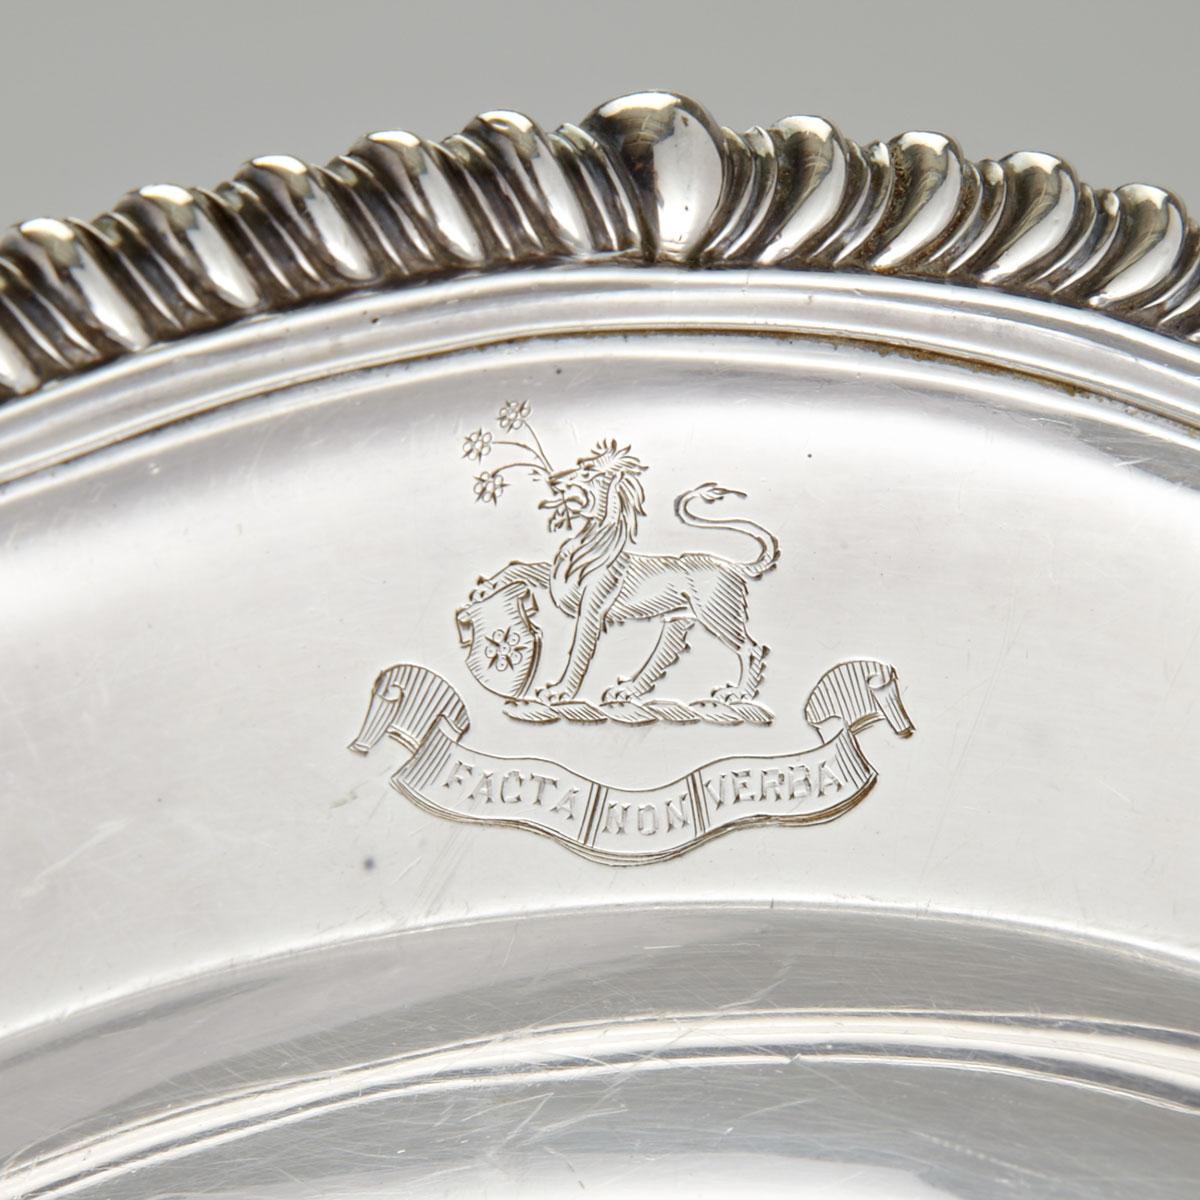 Pair of William IV Silver Second Course Dishes, Mary Sibley & Richard Sibley II, London, 1836